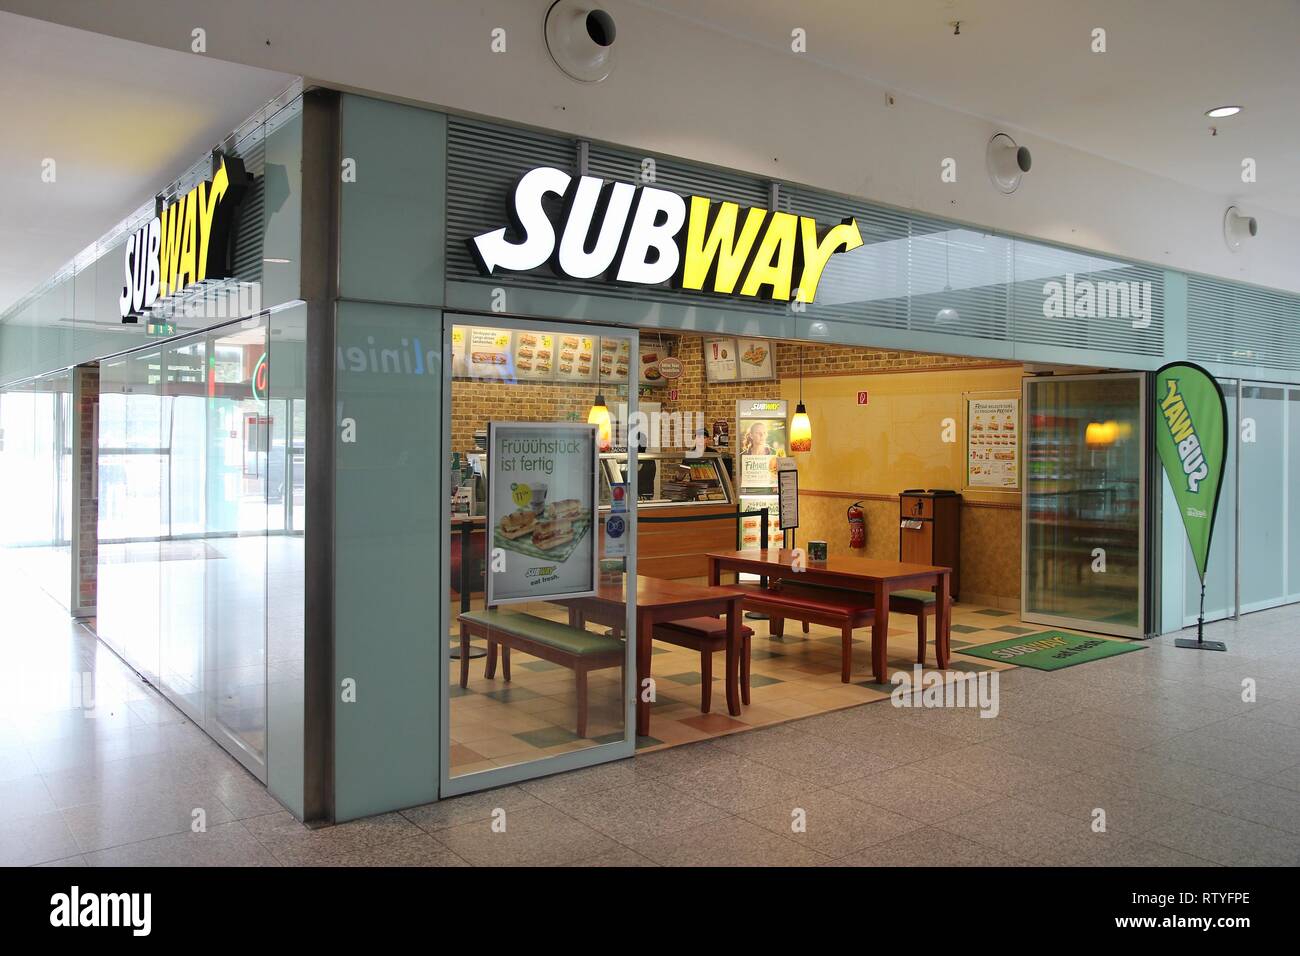 BERLIN, GERMANY - AUGUST 26, 2014: Sandwich seller waits for customers in Subway restaurant at a railway station in Berlin. Subway has 44,852 restaura Stock Photo